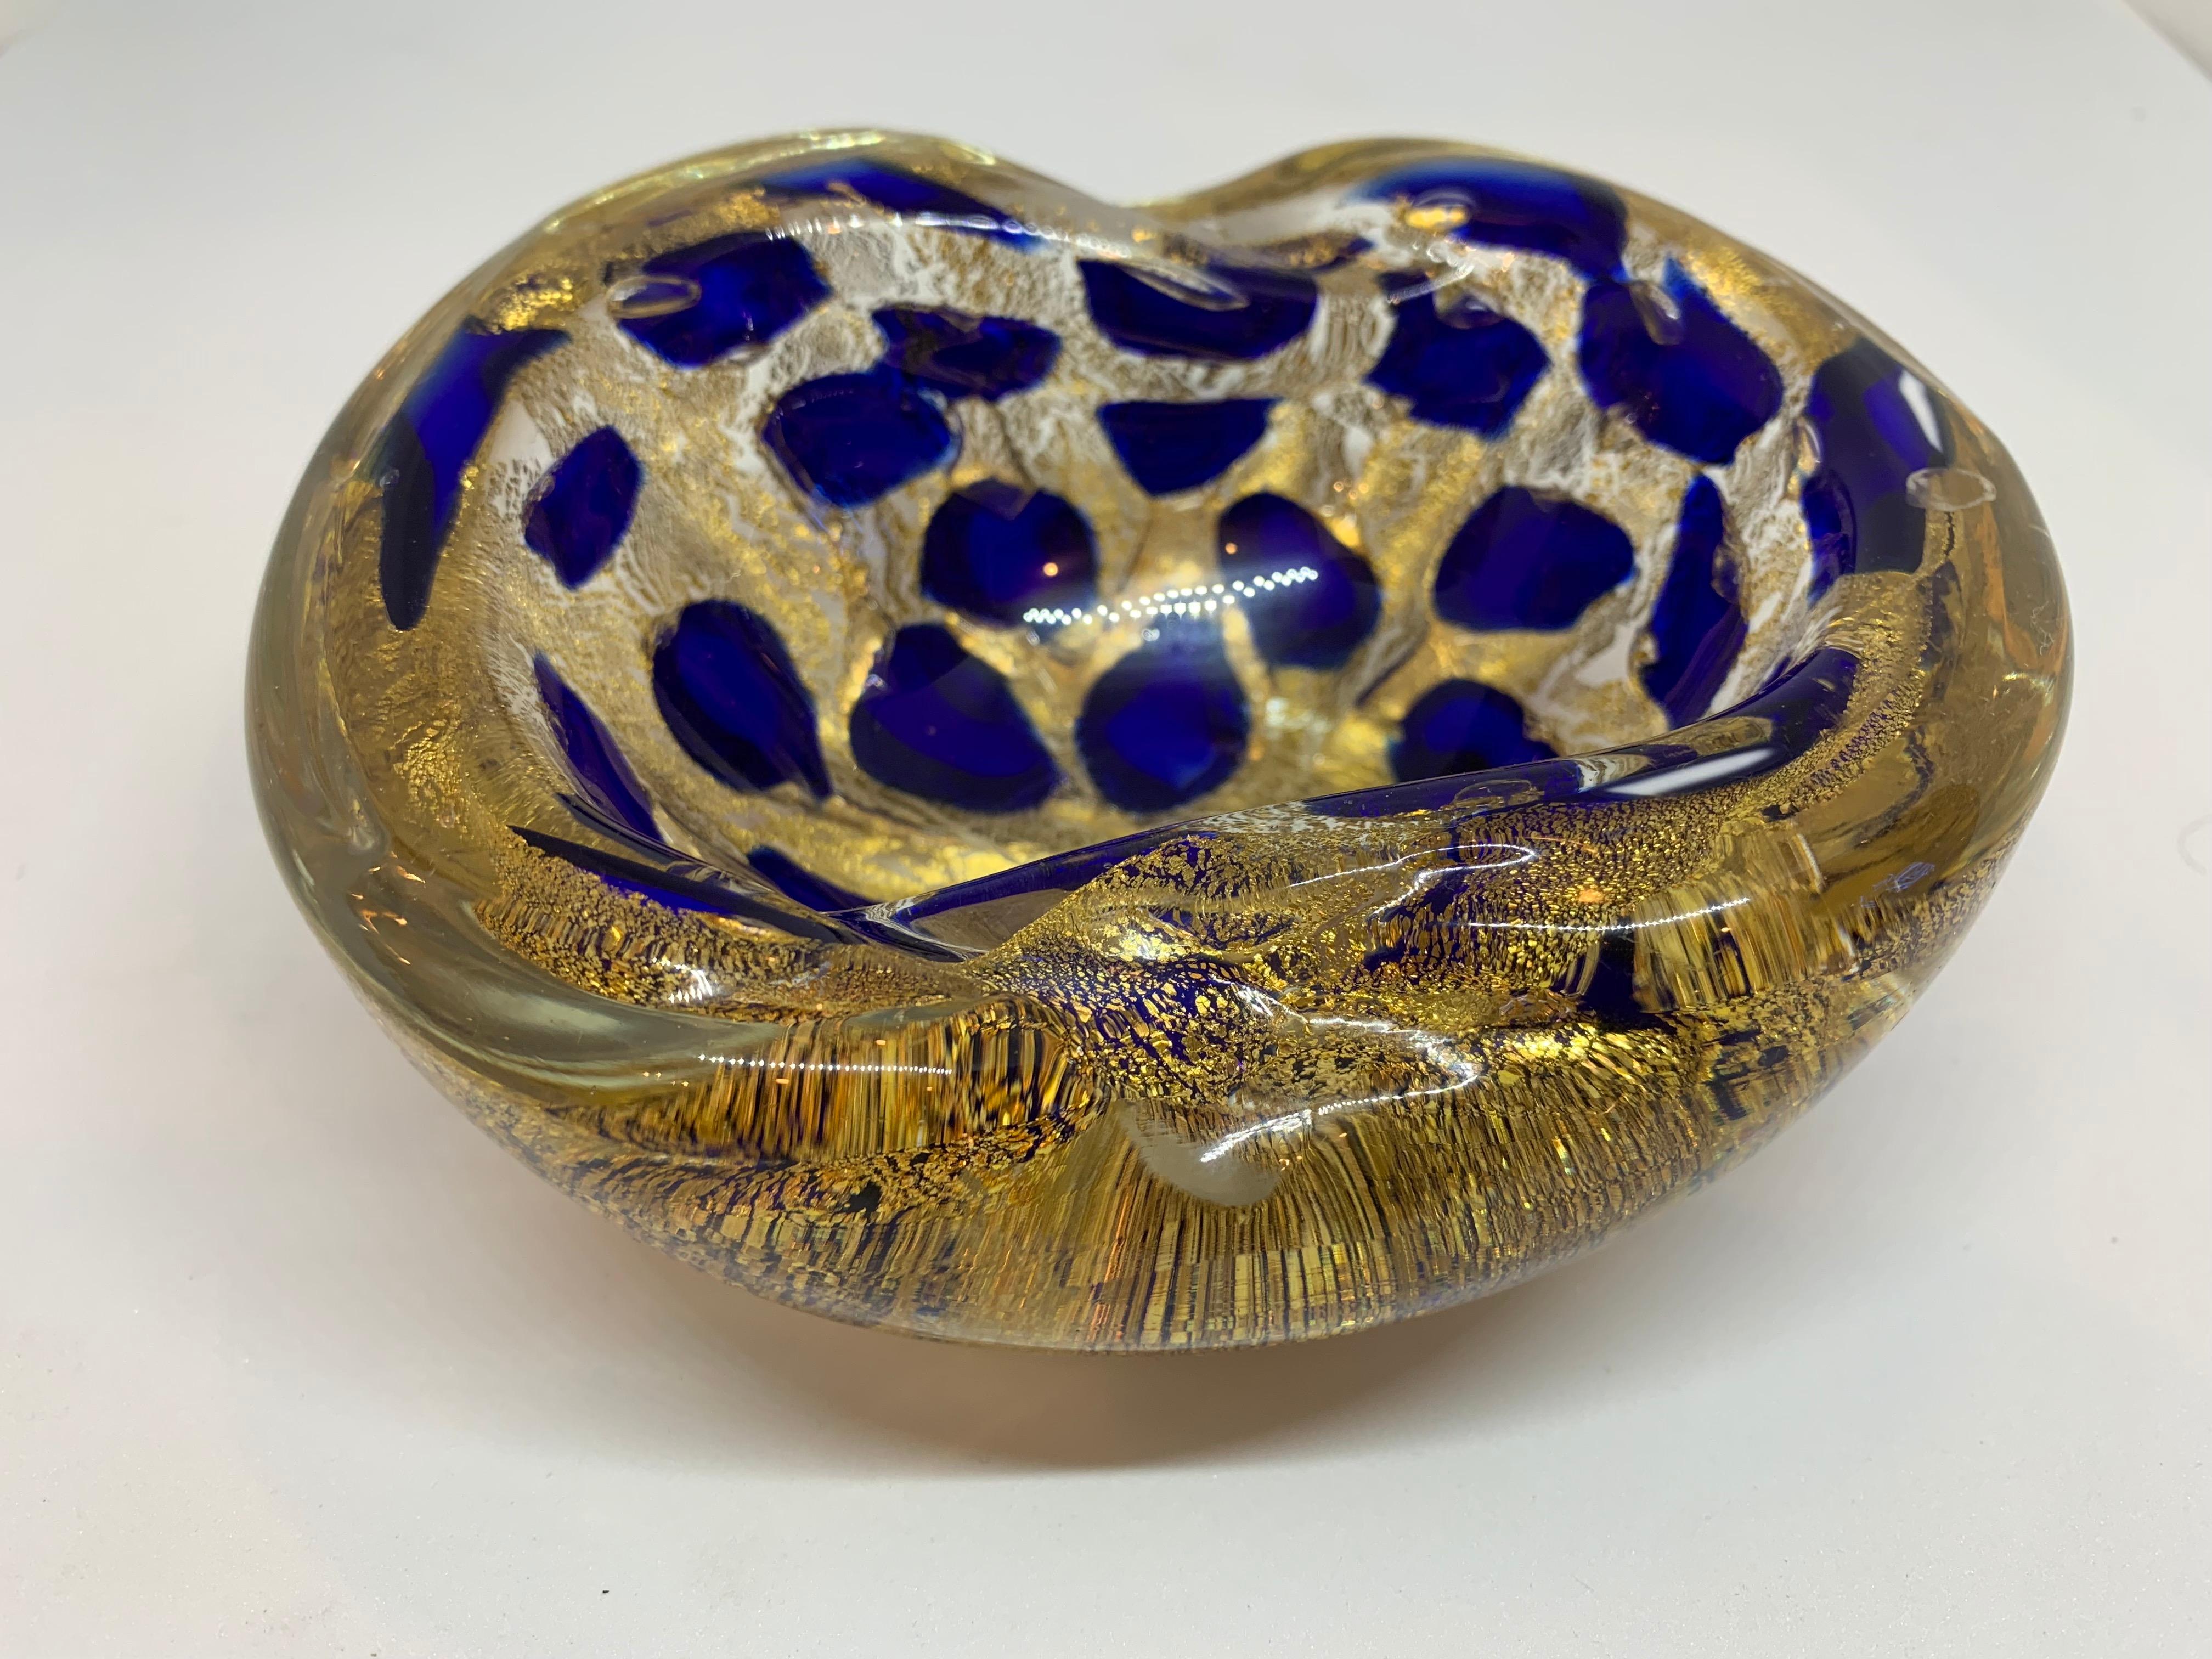 Murano Glass 1950s Vibrant Cobalt Blue and Gold Murano Ashtray Bowl by Barovier and Toso